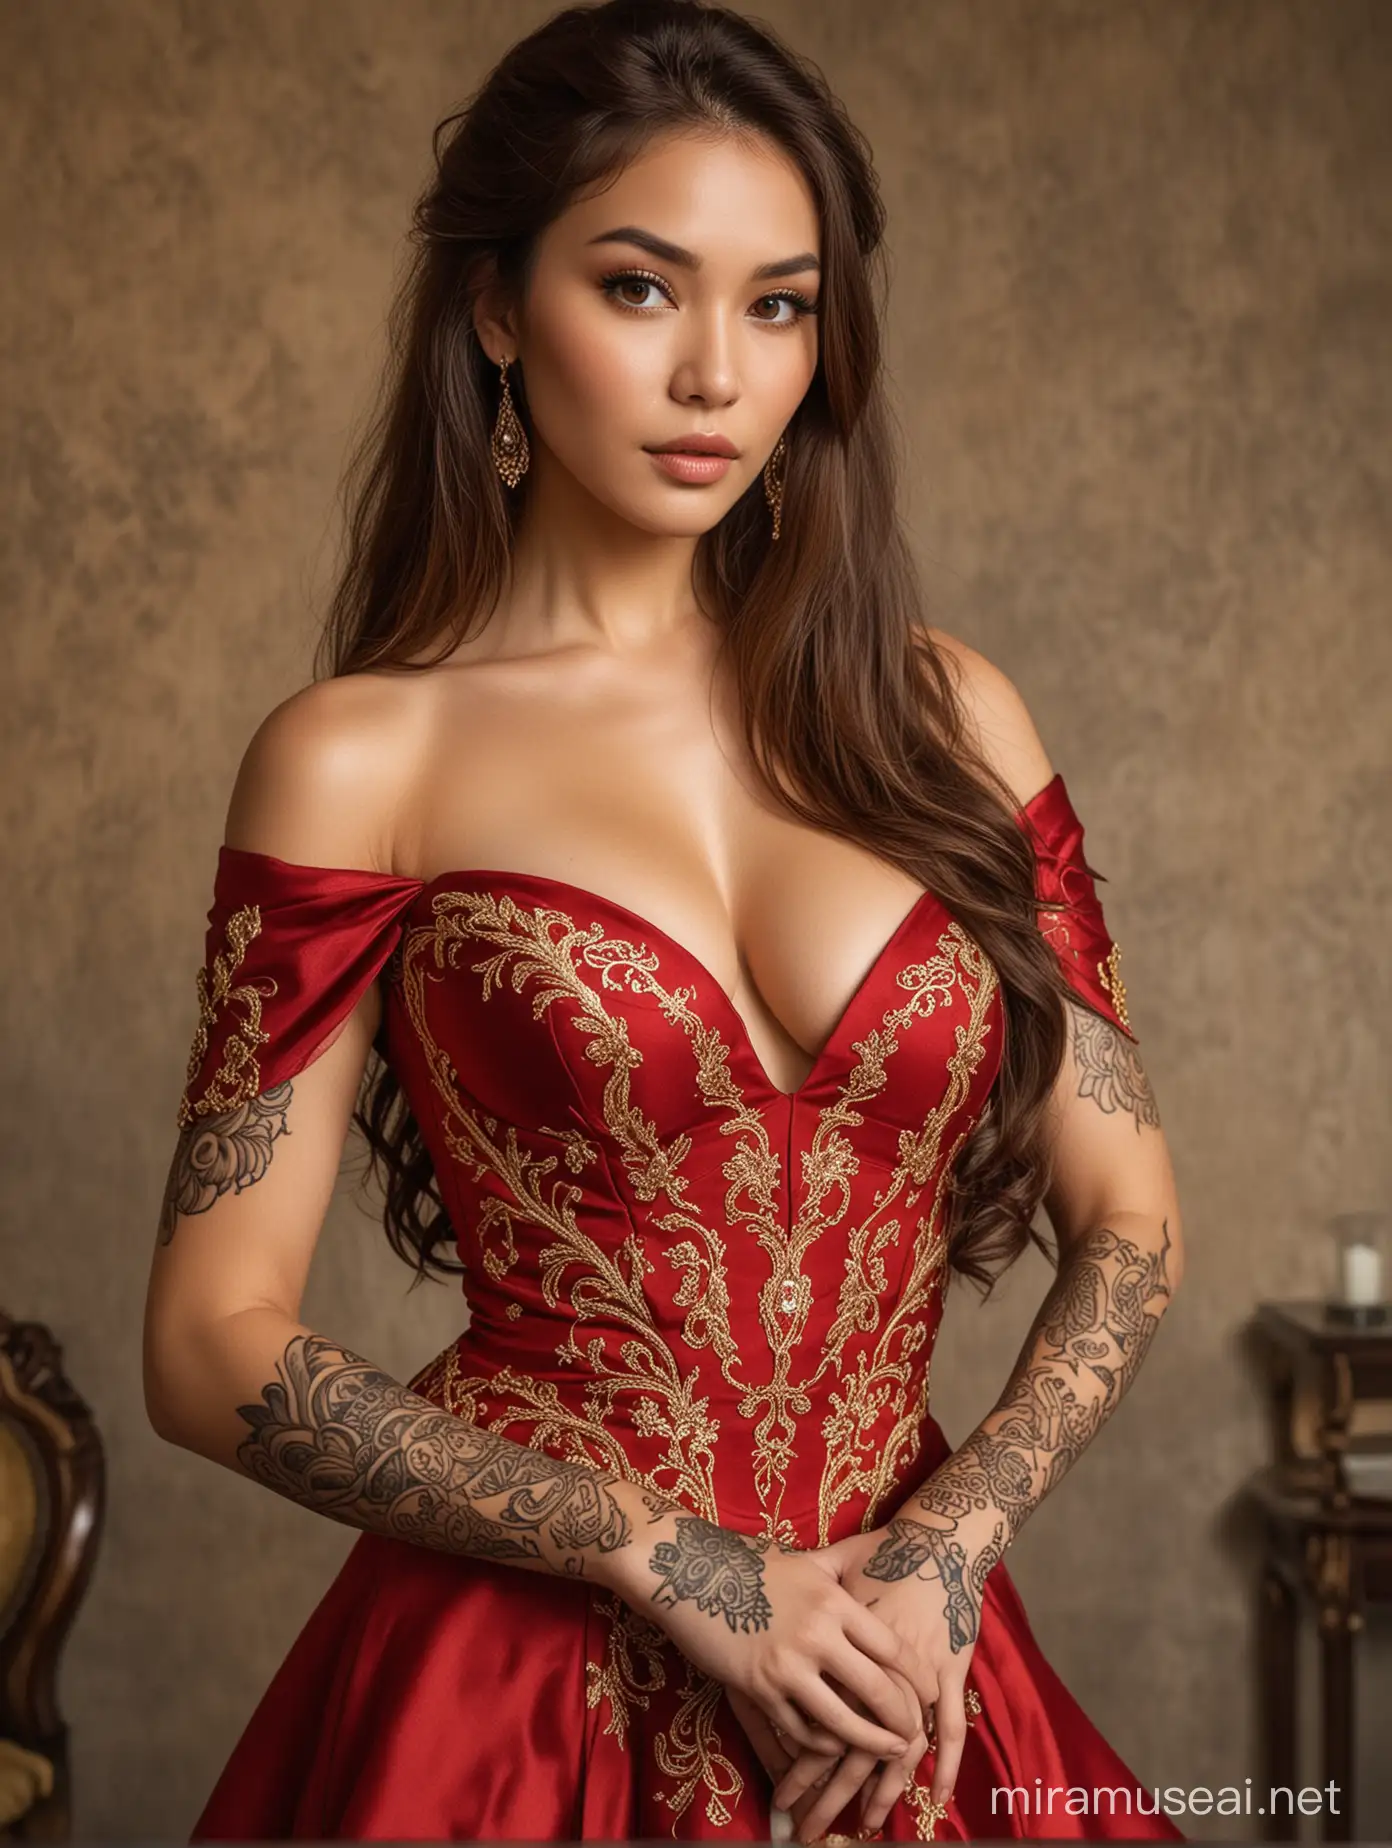 Handmaiden of Queen, red and gold gown, soft brown eyes, long luxurious brown hair, Choco skin, sexy, tattoo on wrist, extremely attractive, voluptuous figure